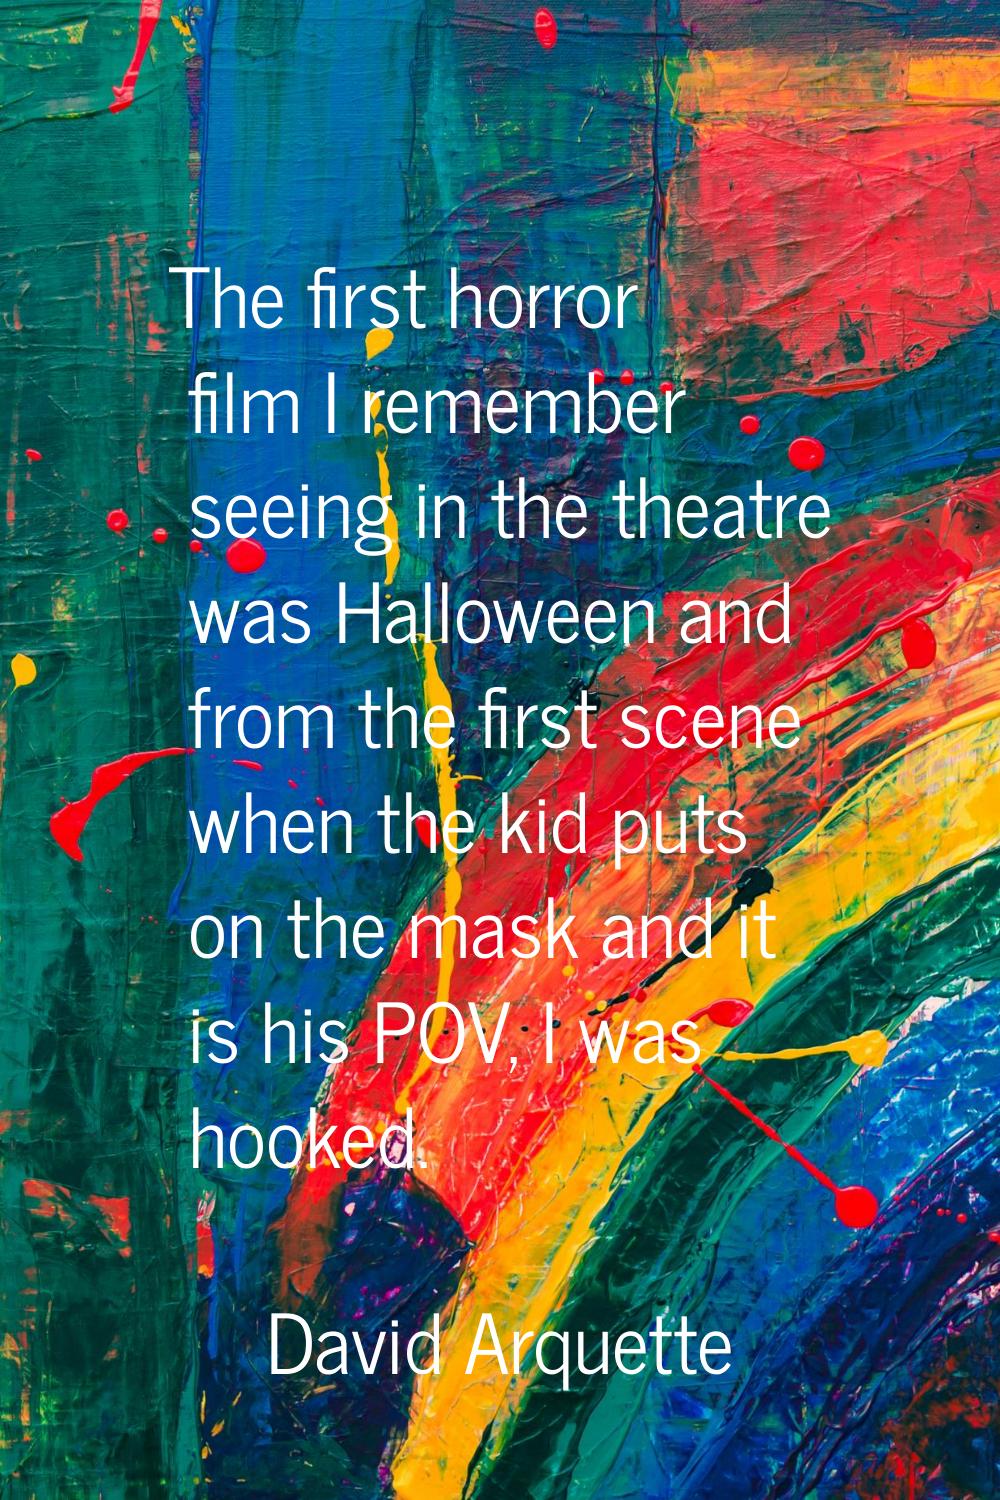 The first horror film I remember seeing in the theatre was Halloween and from the first scene when 